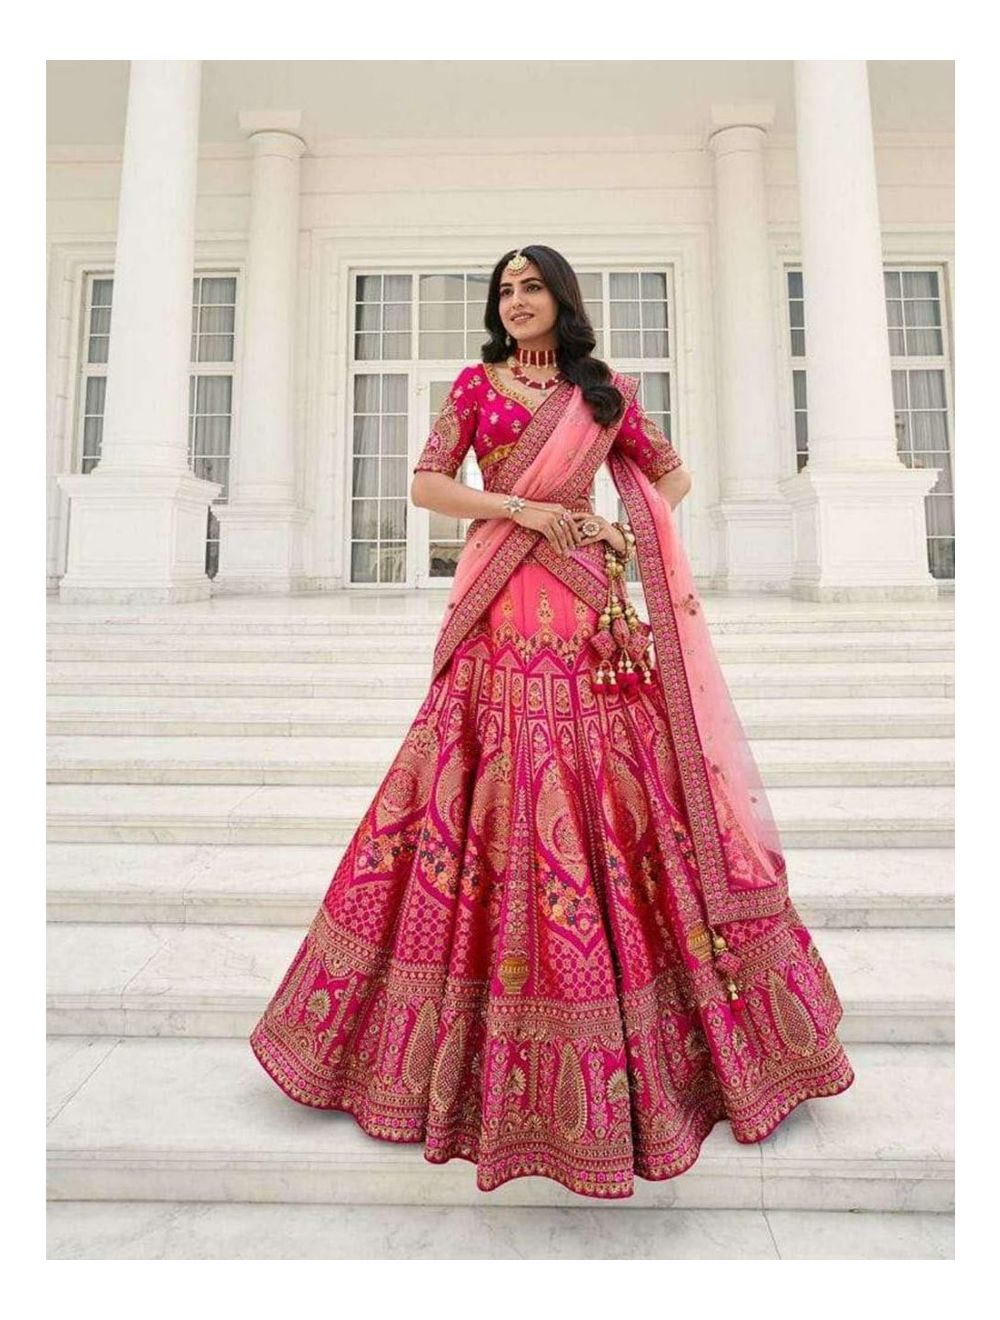 Here are some ideas for the perfect pink bridal lehenga - Styl Inc